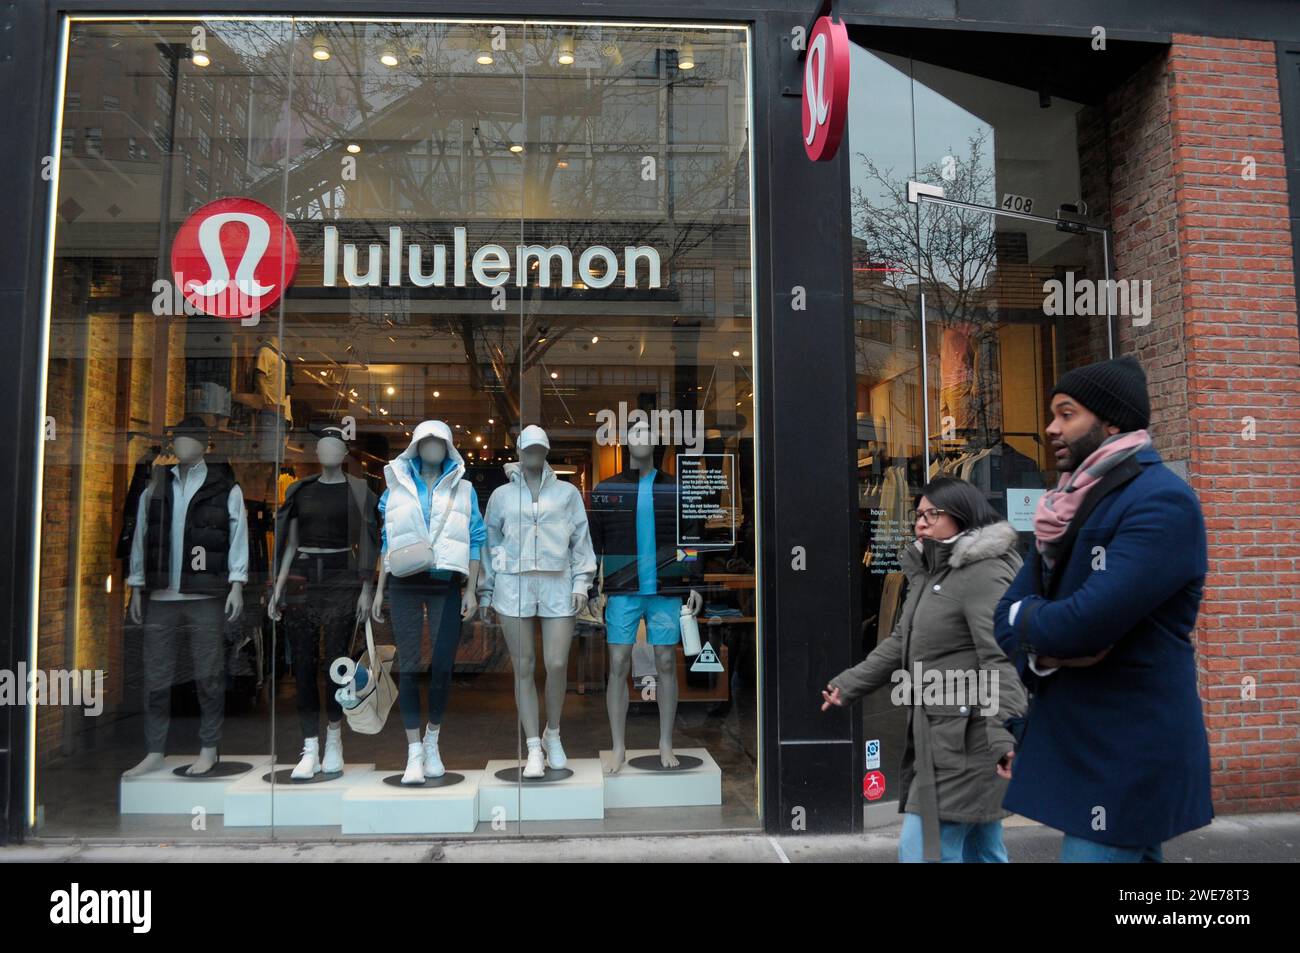 Search Results for lululemon